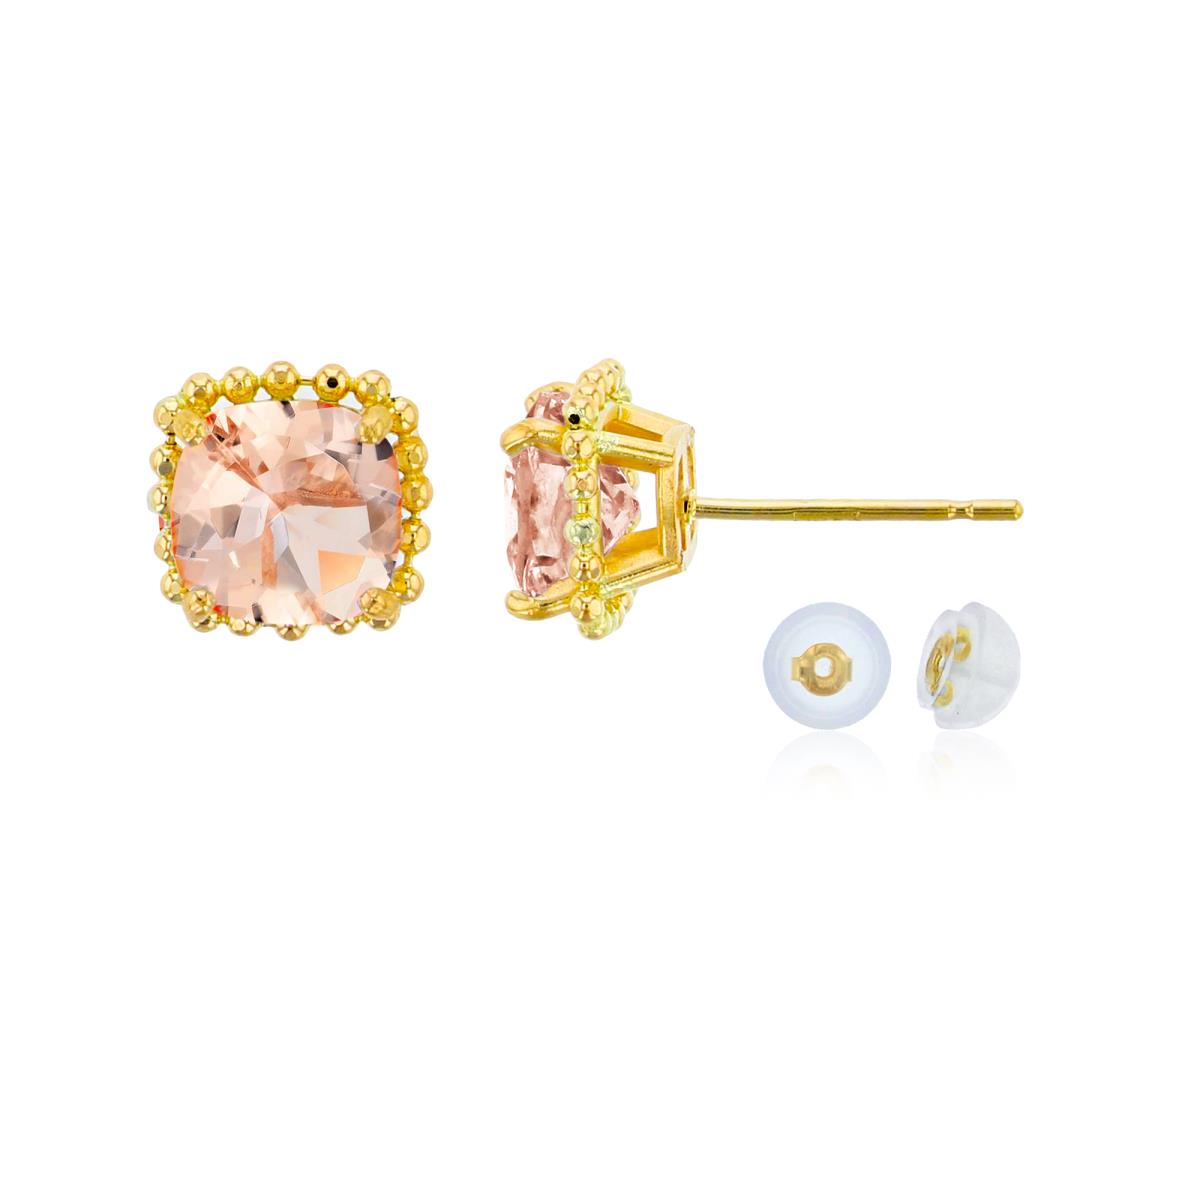 10K Yellow Gold 6x6mm Cushion Cut Morganite Bead Frame Stud Earring with Silicone Back